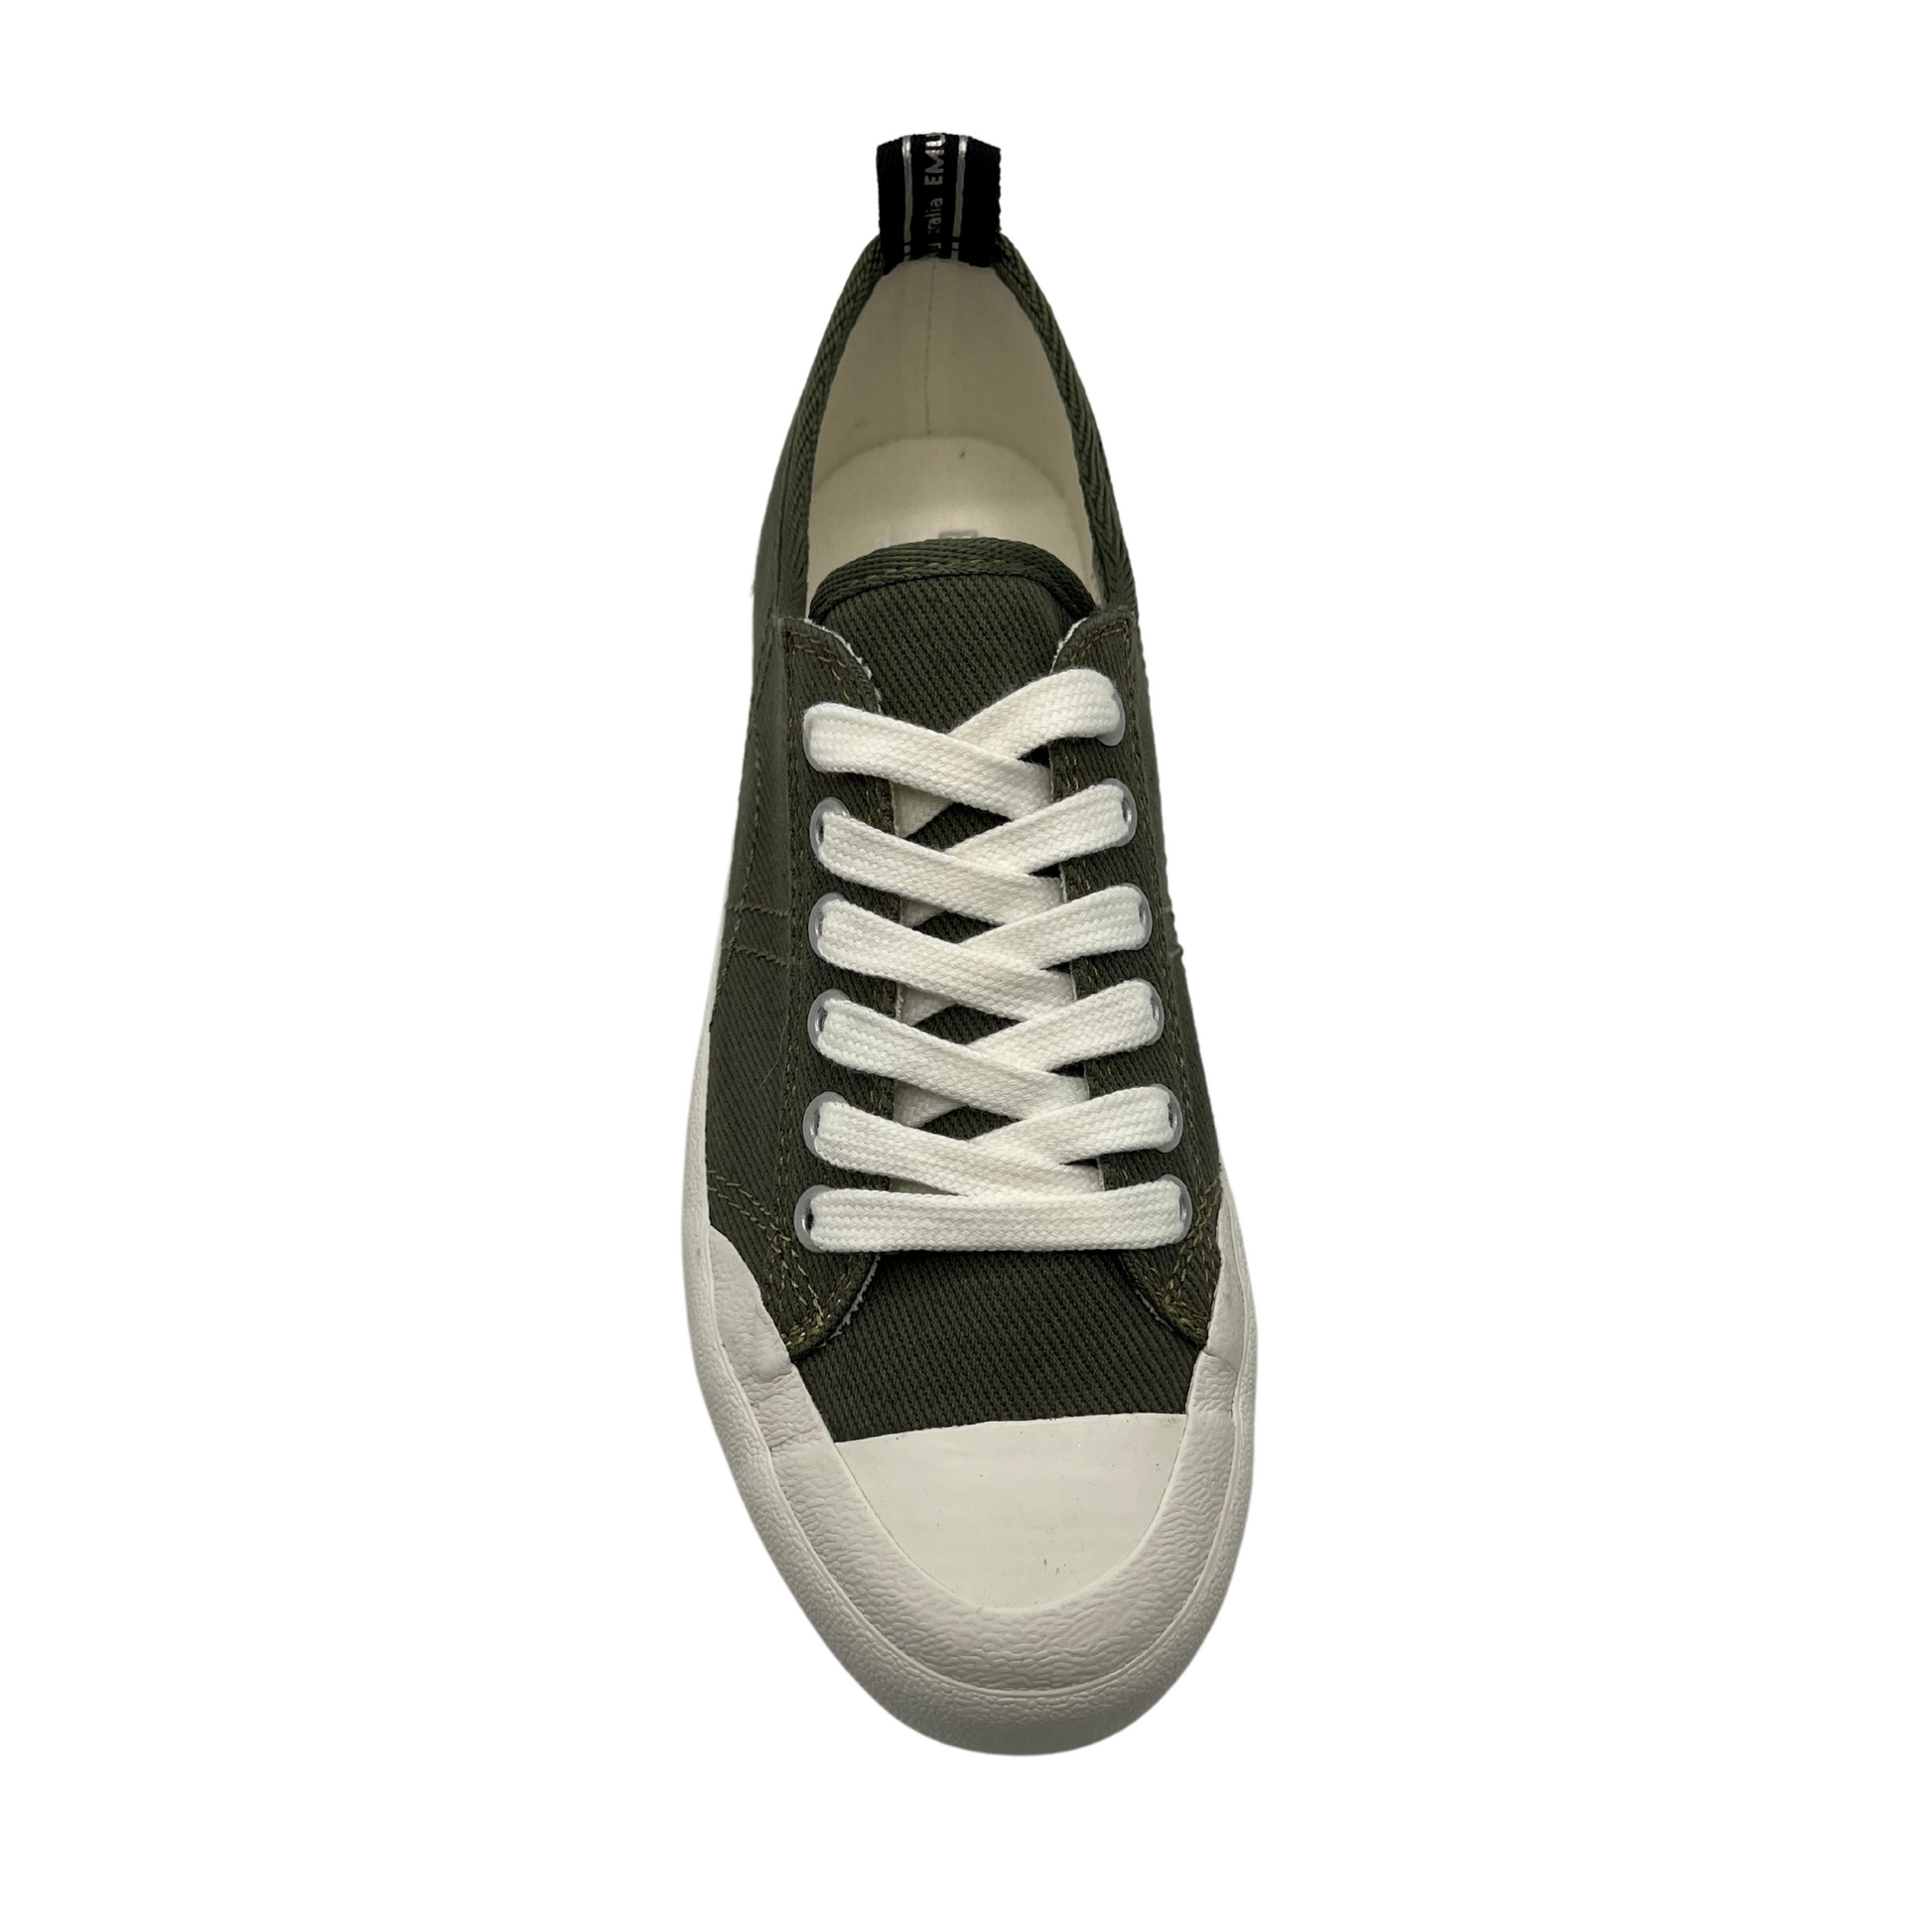 Top view of green cotton sneaker with white rubber outsole and matching laces